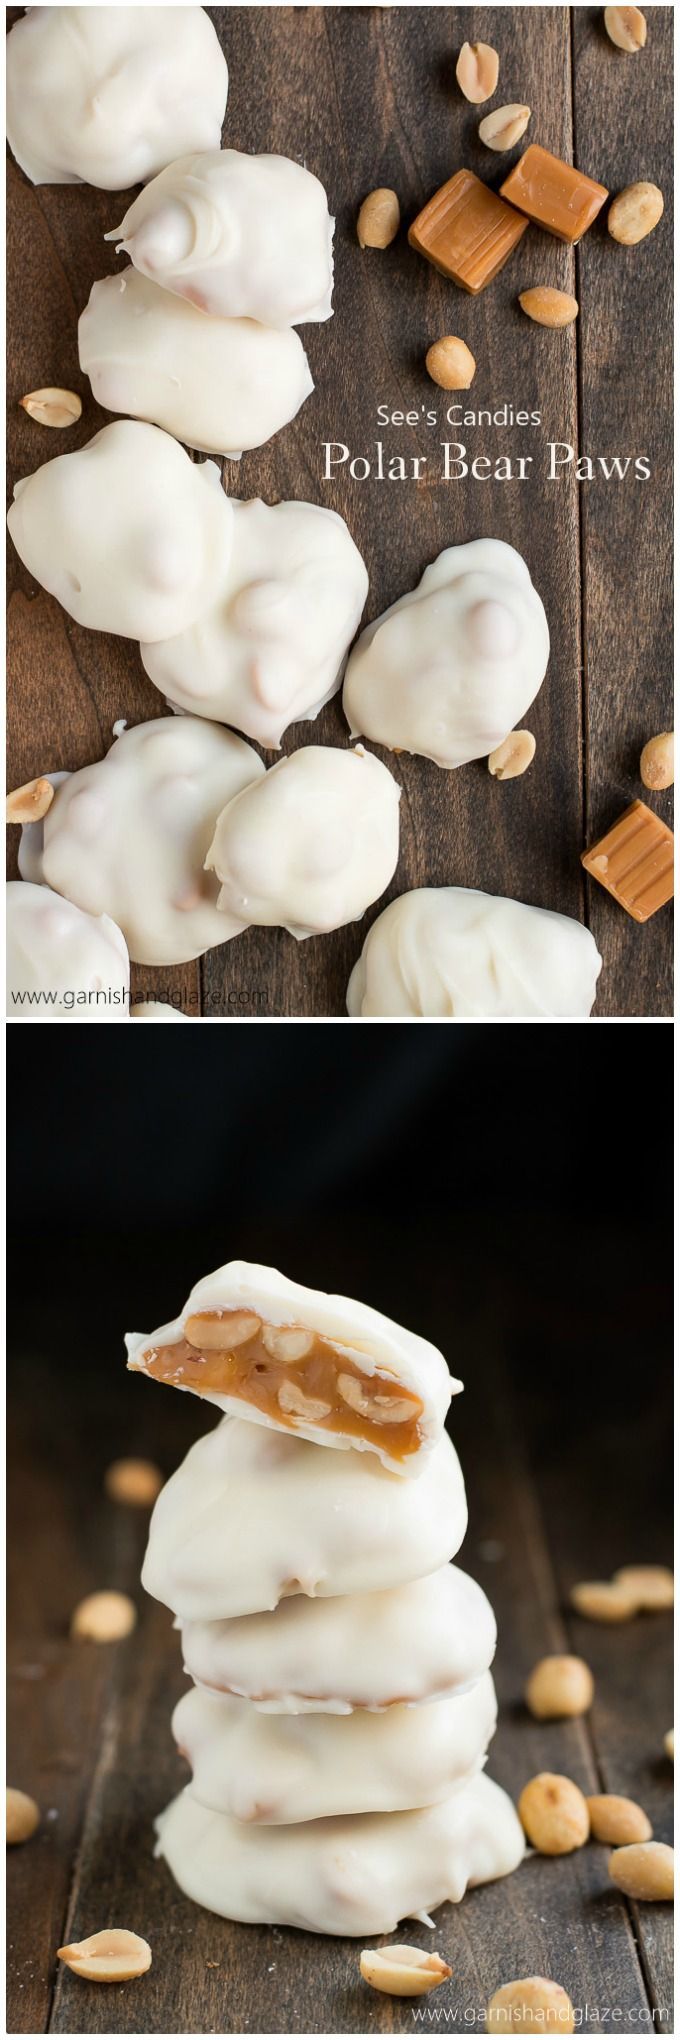 Polar Bear Paws {See’s Candies Copycat} are filled with salty roasted peanuts and soft buttery caramel, all coated in sweet white